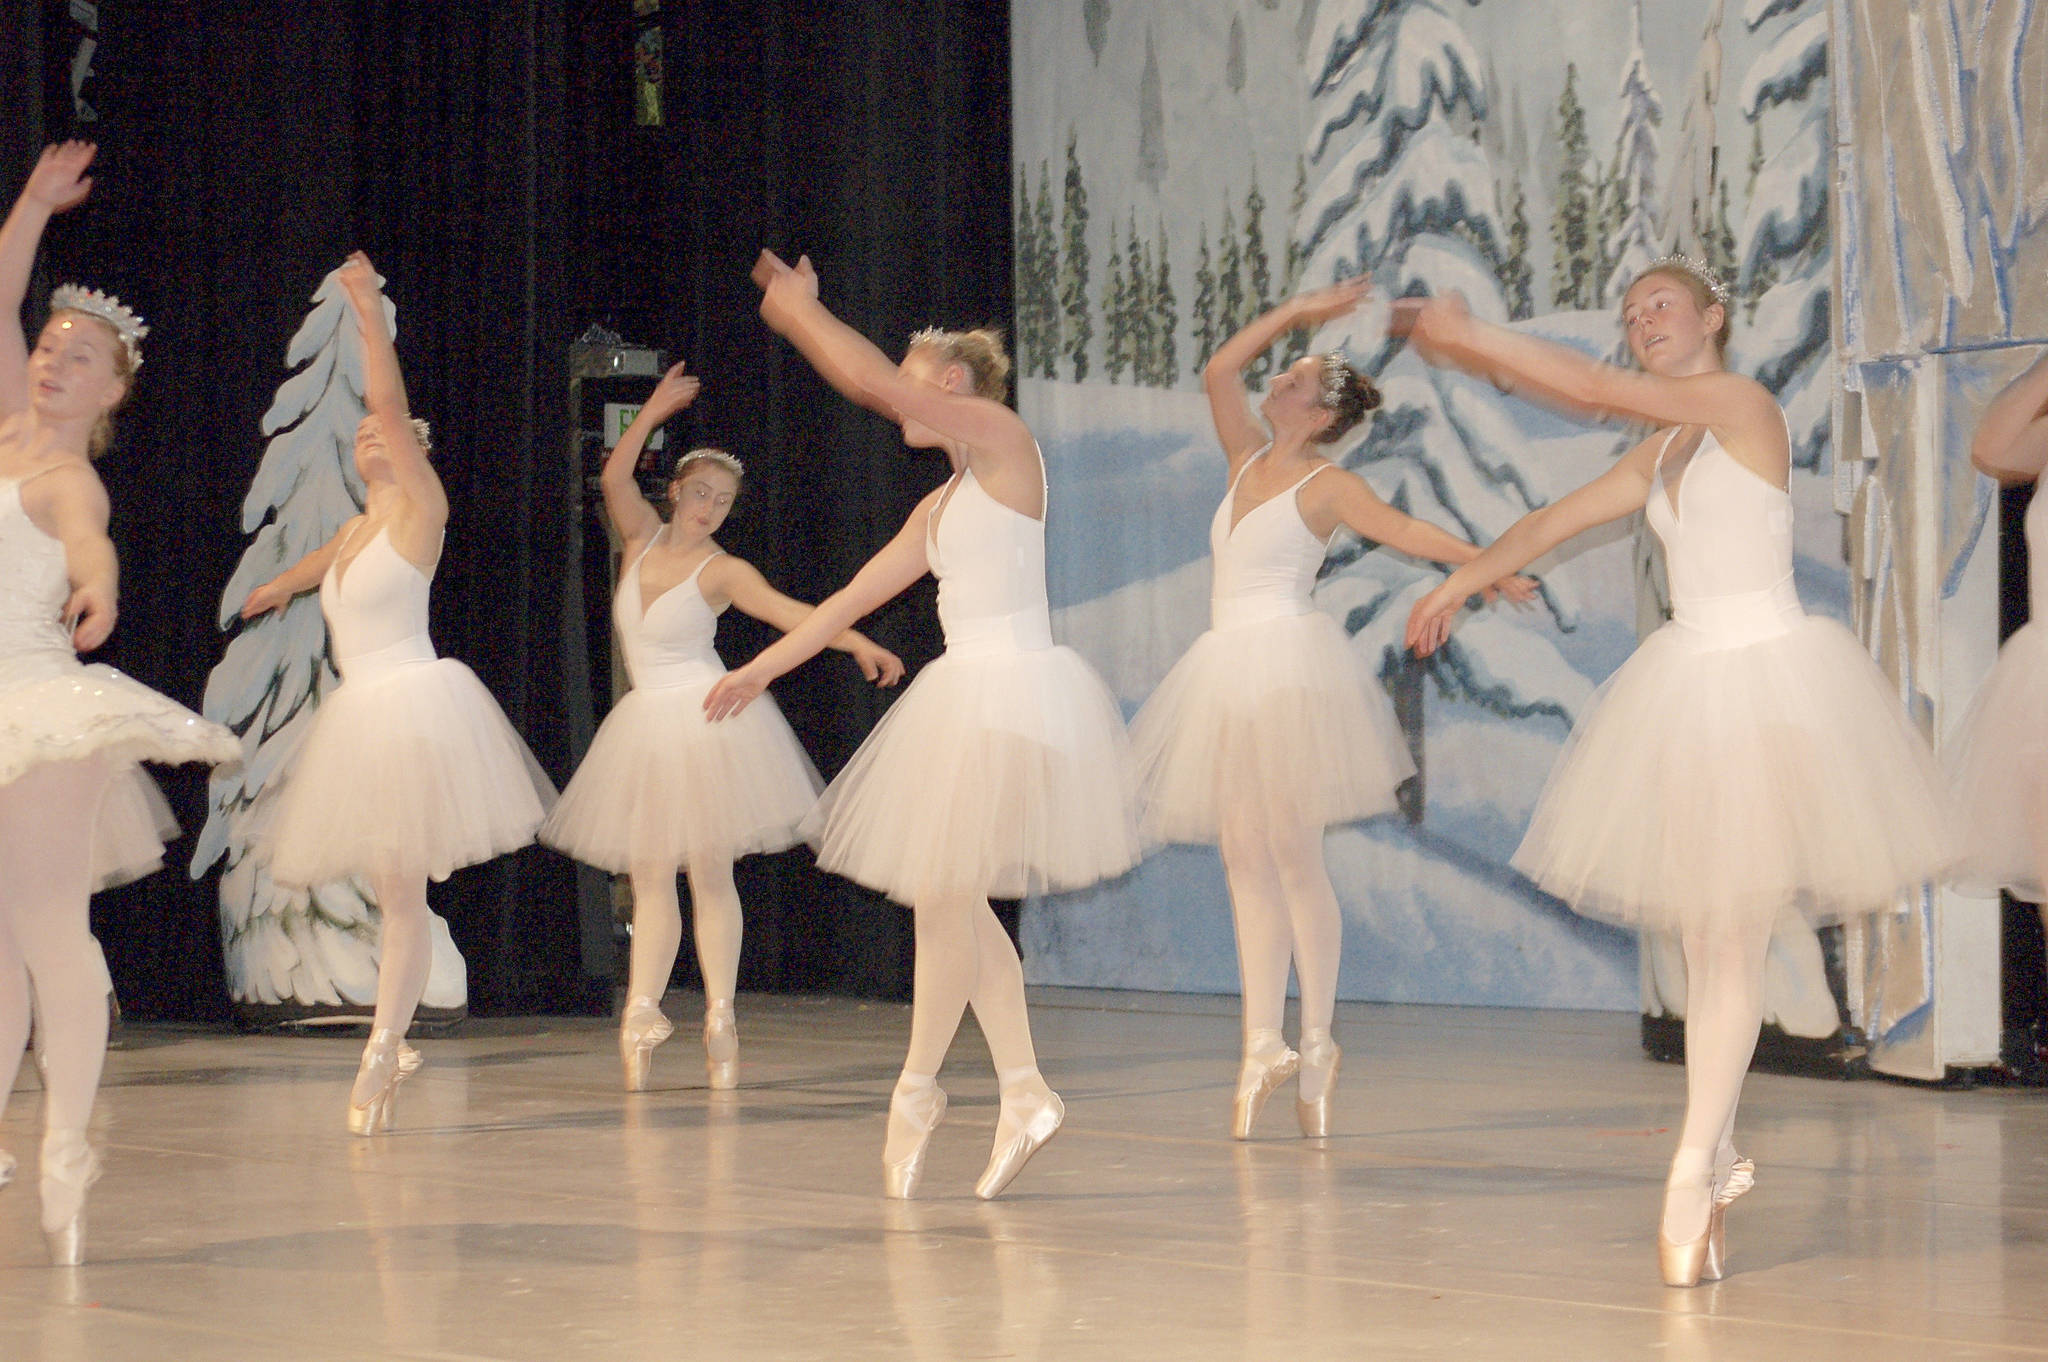 Photo by Joan Soltys                                &lt;em&gt;Whidbey Island Dance Theatre company dancers perform the Waltz of the Snowflakes in “The Nutcracker.”&lt;/em&gt;                                Joan Soltys photo                                Whidbey Island Dance Theatre company dancers perform the Waltz of the Snowflakes in “The Nutcracker.”